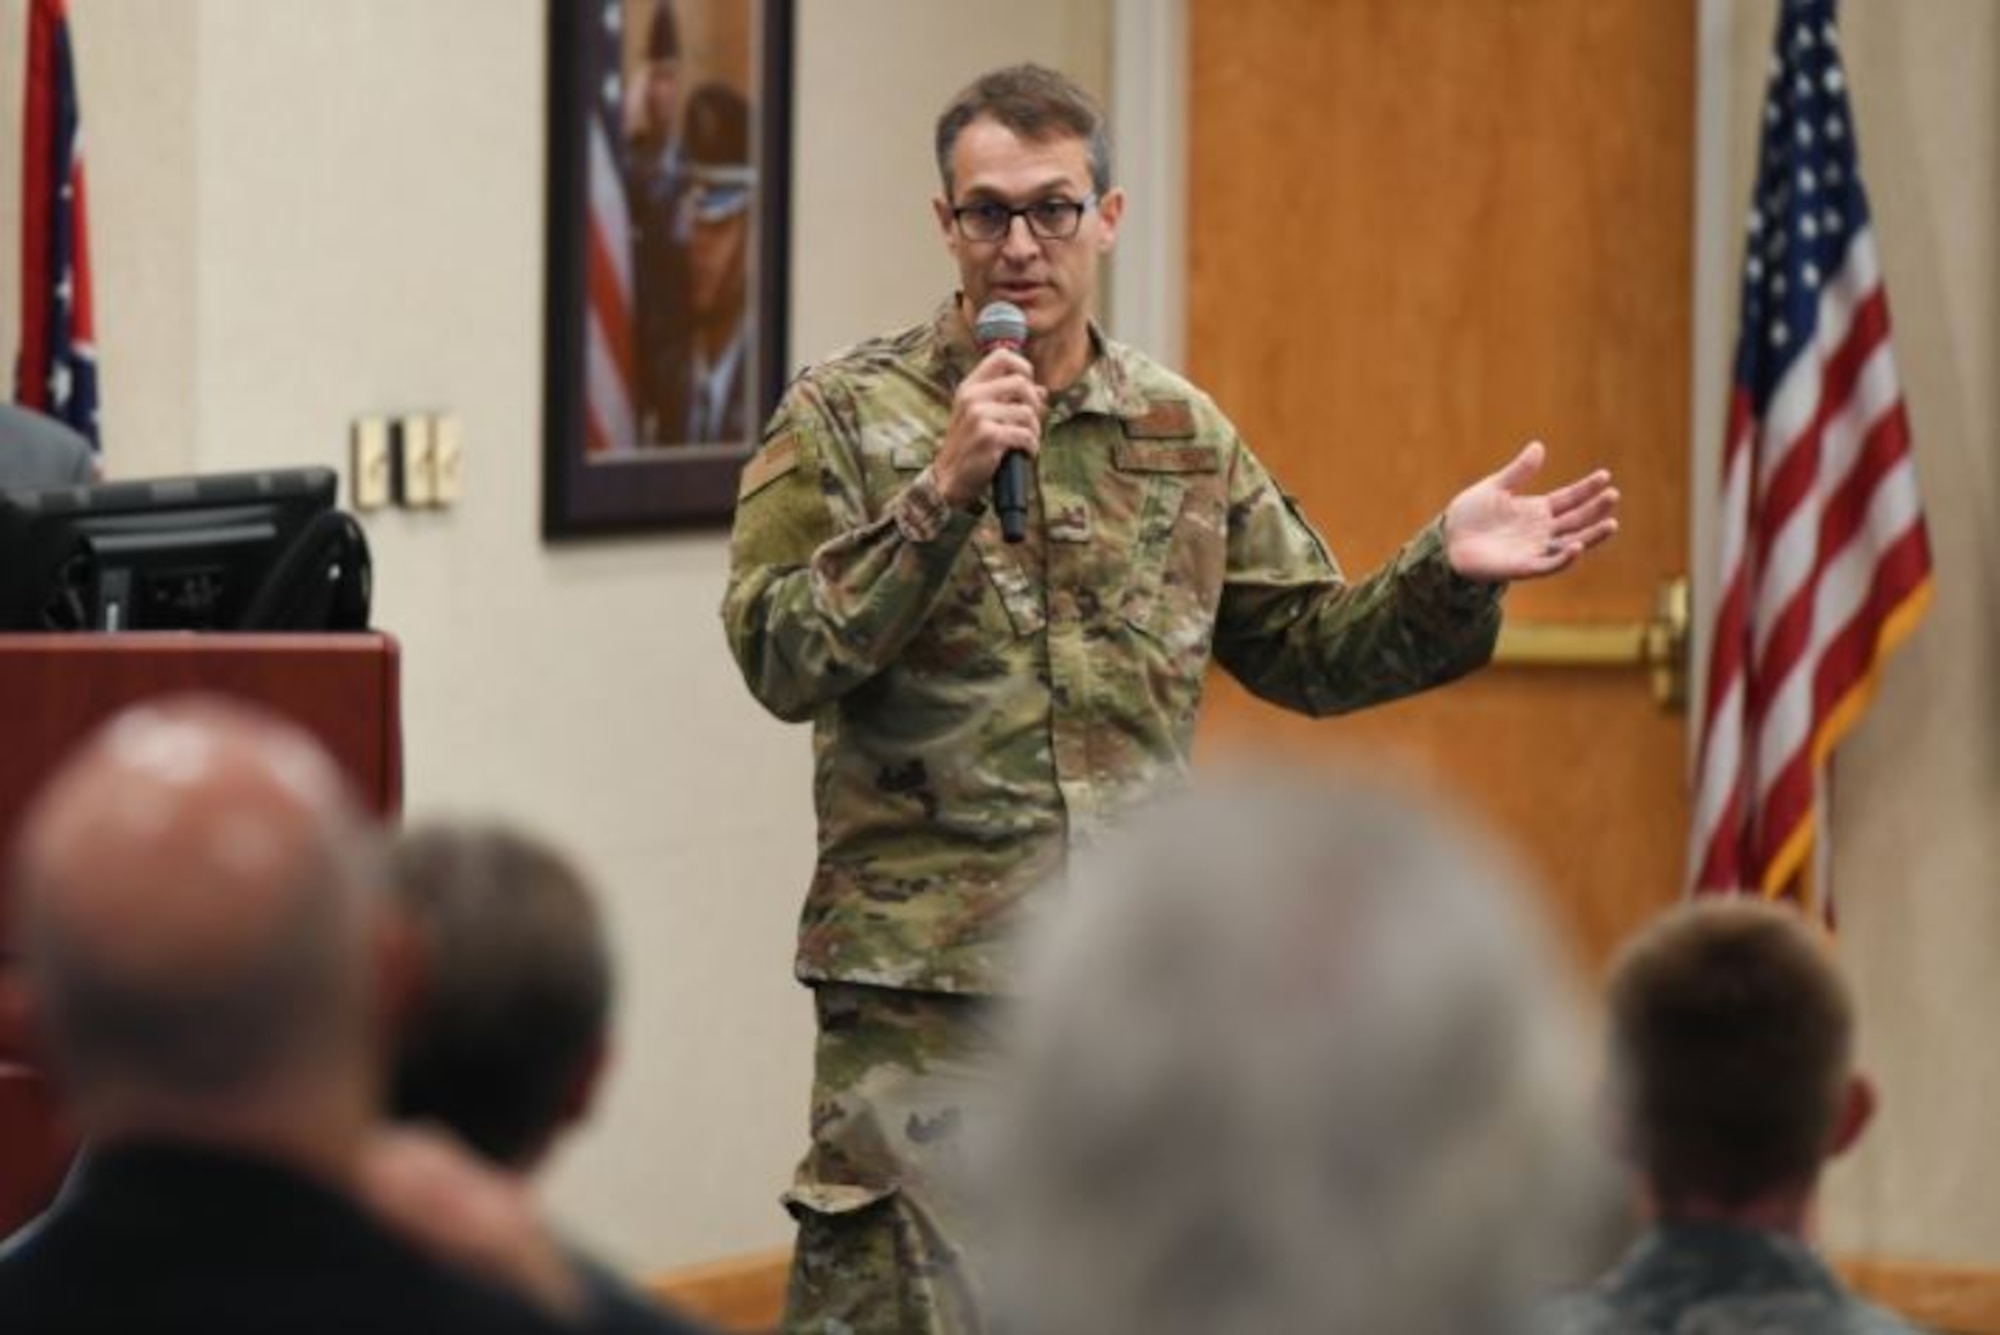 Brig. Gen. Scott Cain, 96th Test Wing commander at Eglin Air Force Base, Fla., addresses attendees at the Hanscom Test Workshop at the conference center at Hanscom Air Force Base, Mass., on Oct. 21, 2019. The 96th Cyberspace Test Group, Detachment 1, will host the now-quarterly workshop virtually March 2 to impart information on test initiatives, share ideas, and enhance relationships between Hanscom’s acquisition community and the test community (U.S. Air Force photo by Mark Herlihy)